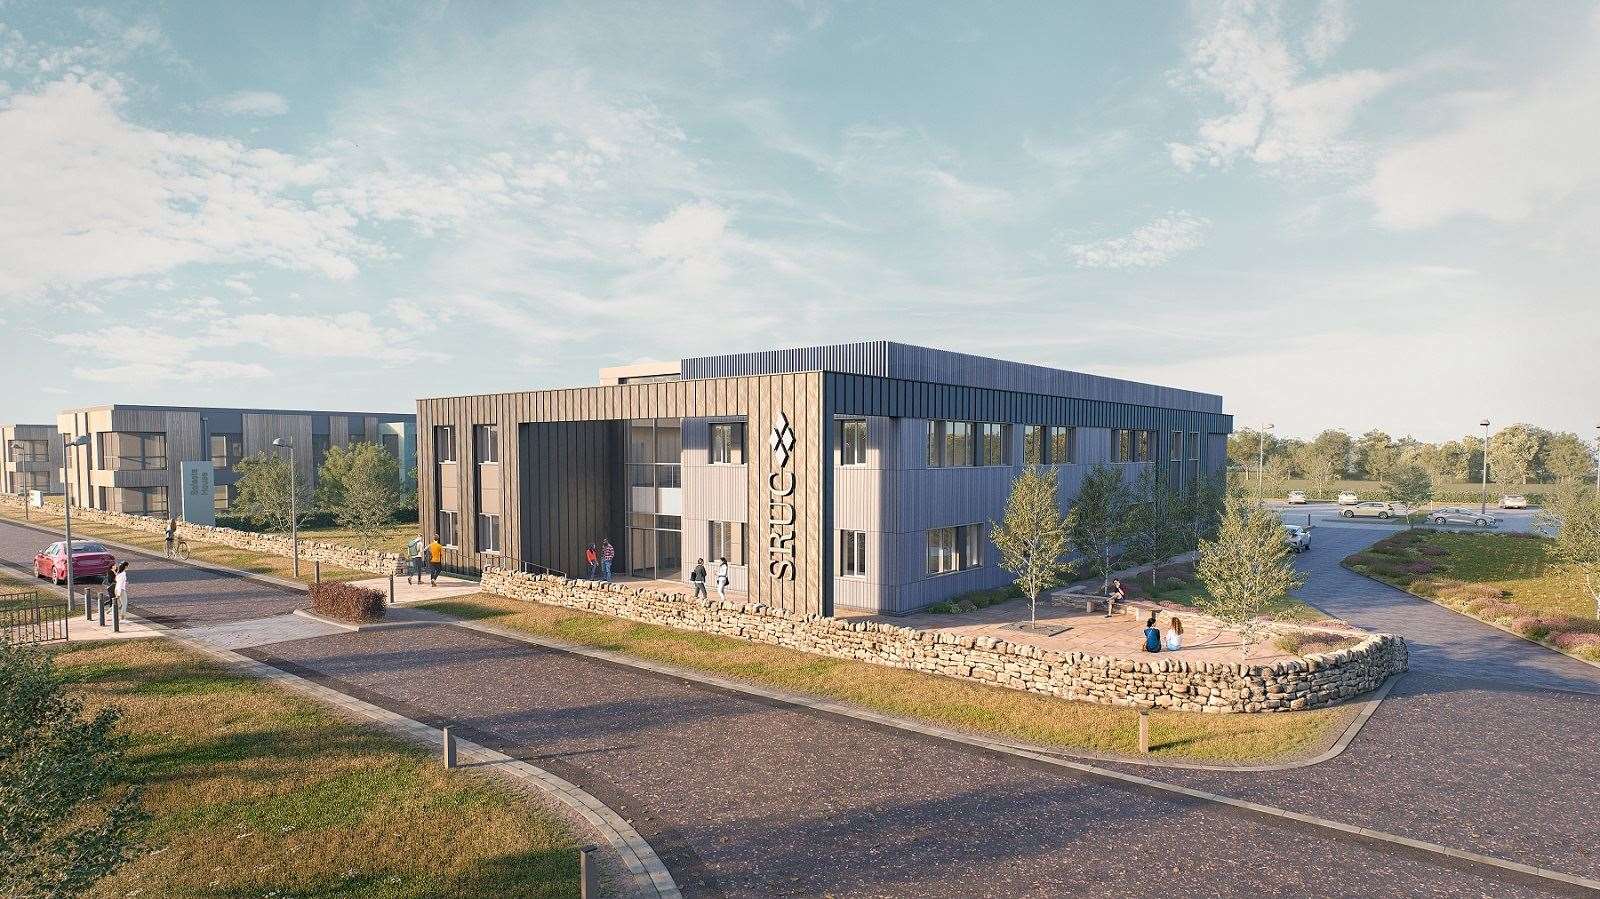 An artist's impression of the proposed rural and veterinary innovation centre in Inverness.